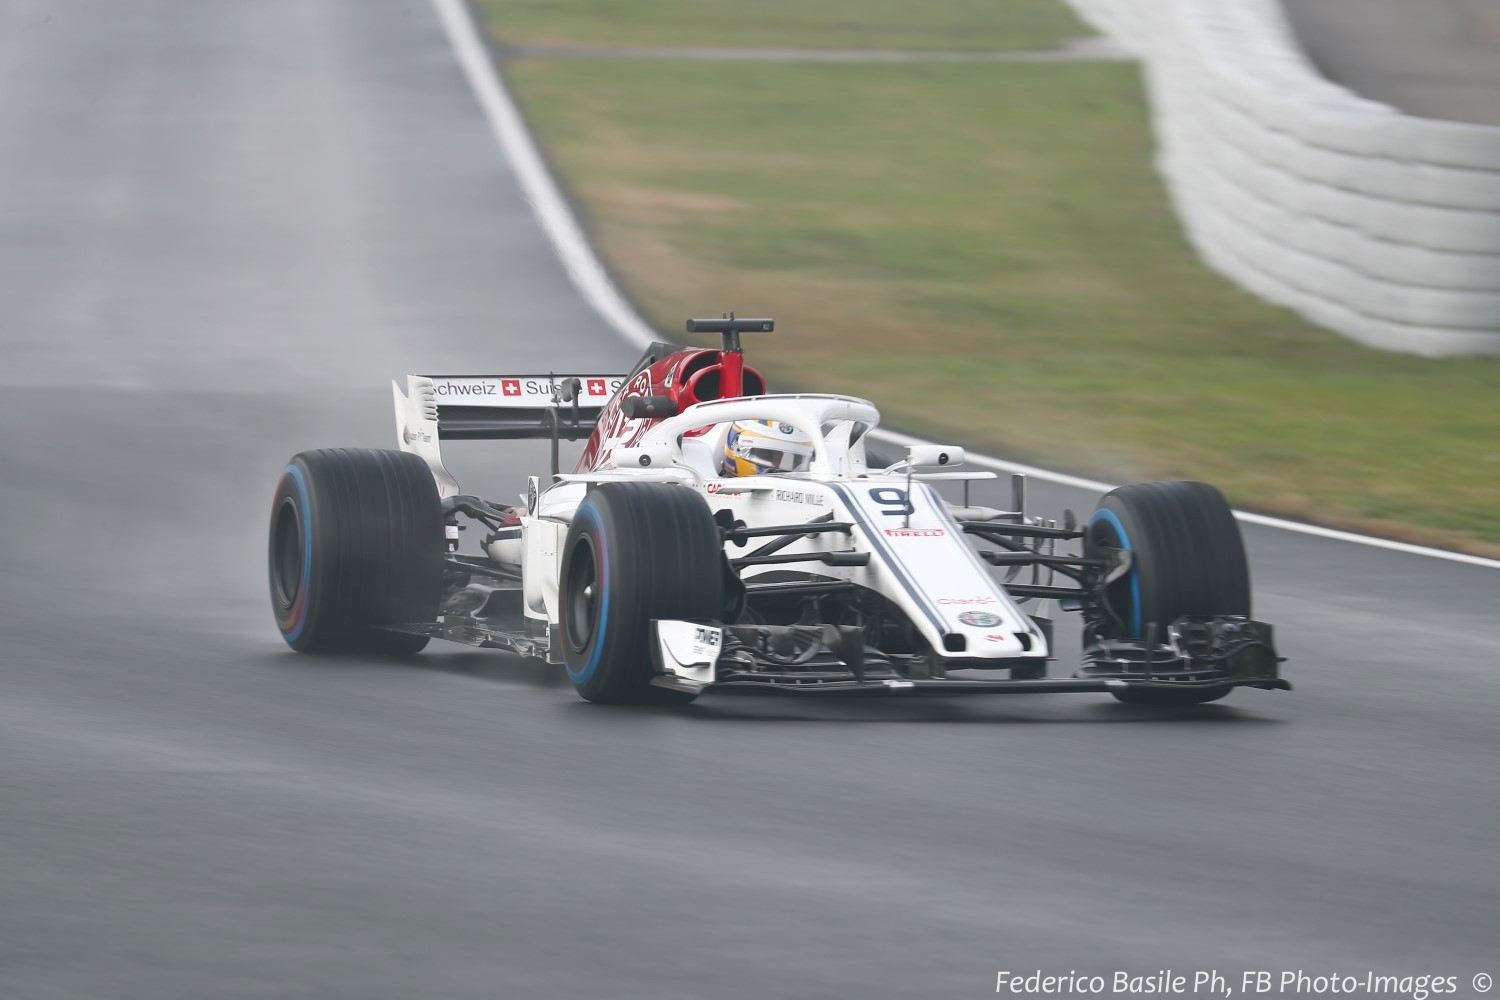 Ericsson caused the only red flag despite the weather